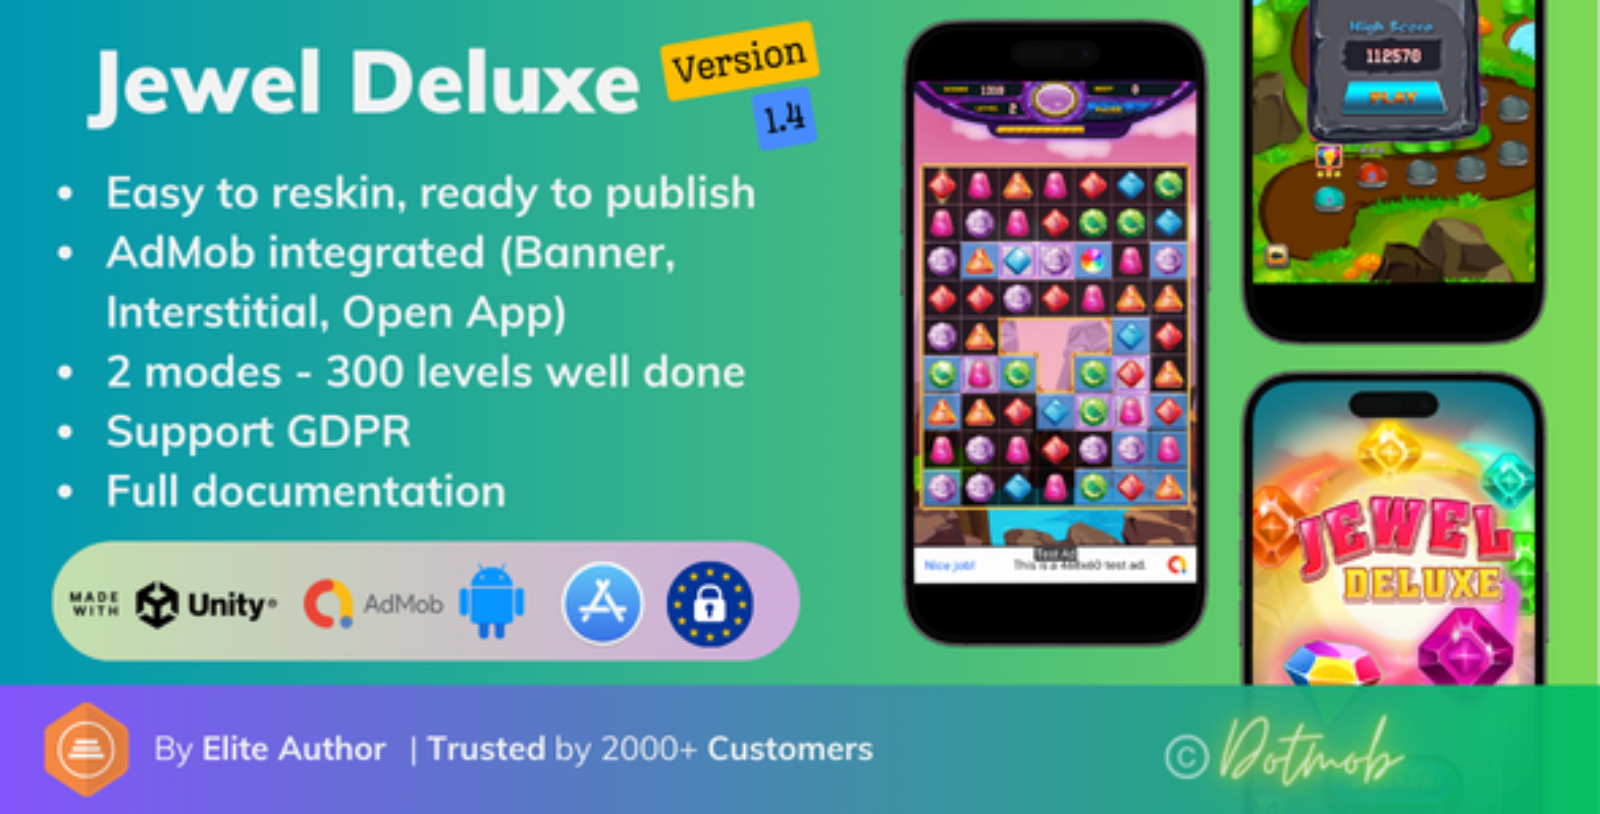 Jewel Deluxe - Unity Complete Project (Android + iOS + AdMob)